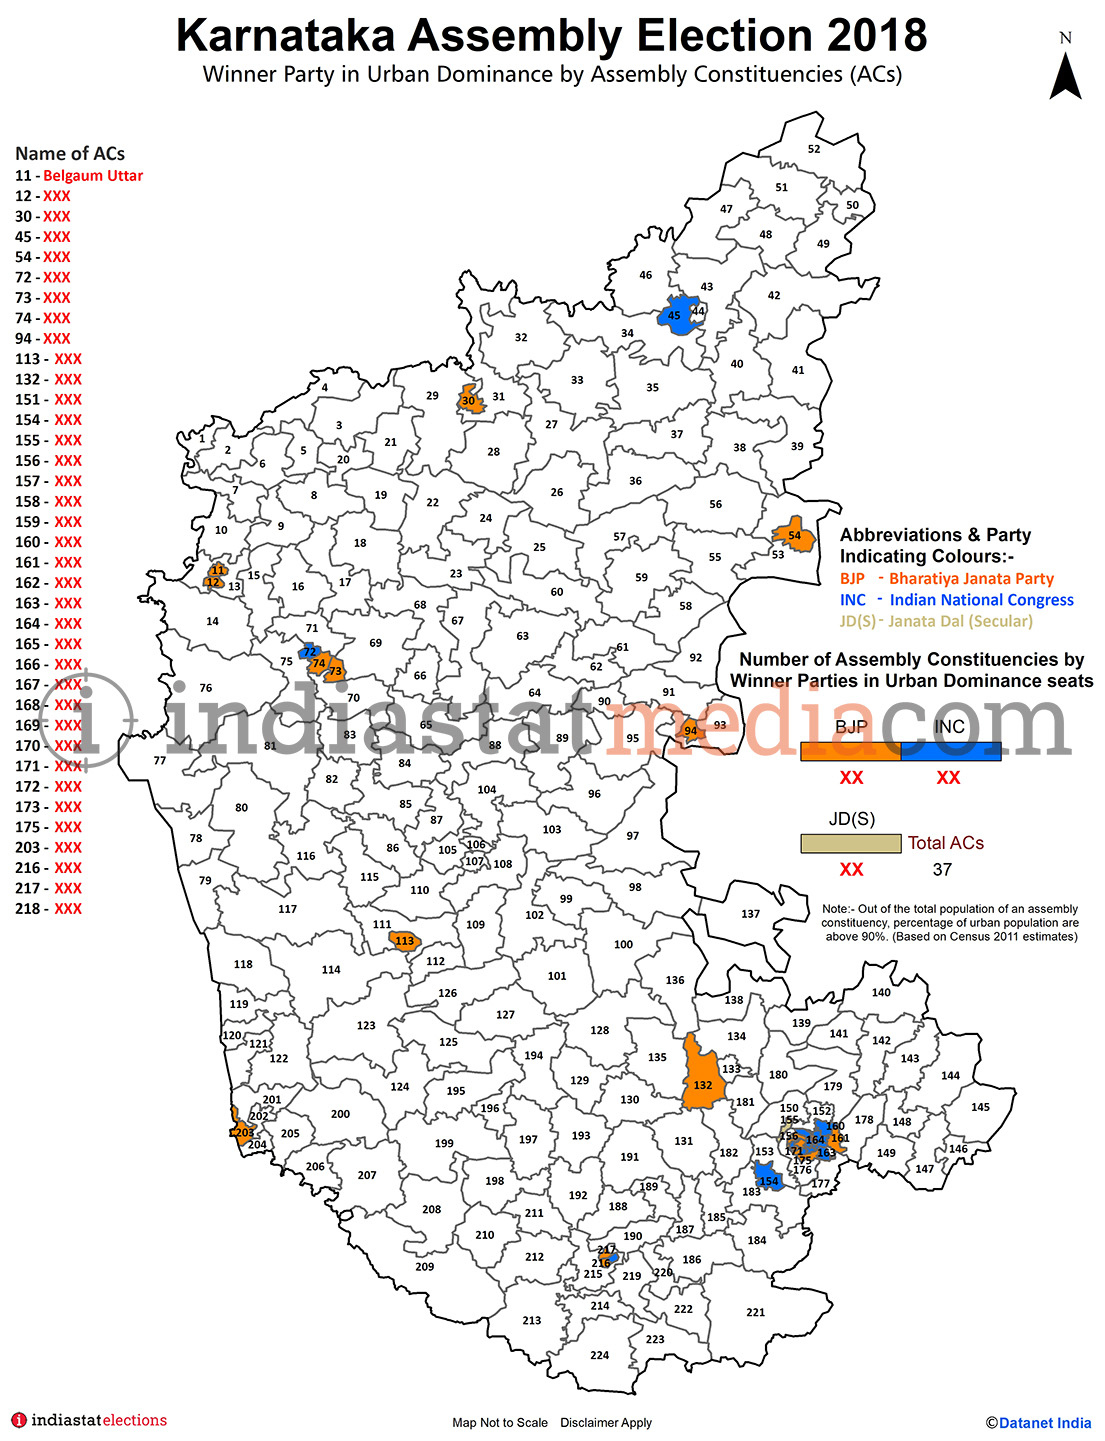 Winner Parties in Urban Dominance Constituencies in Karnataka (Assembly Election - 2018)